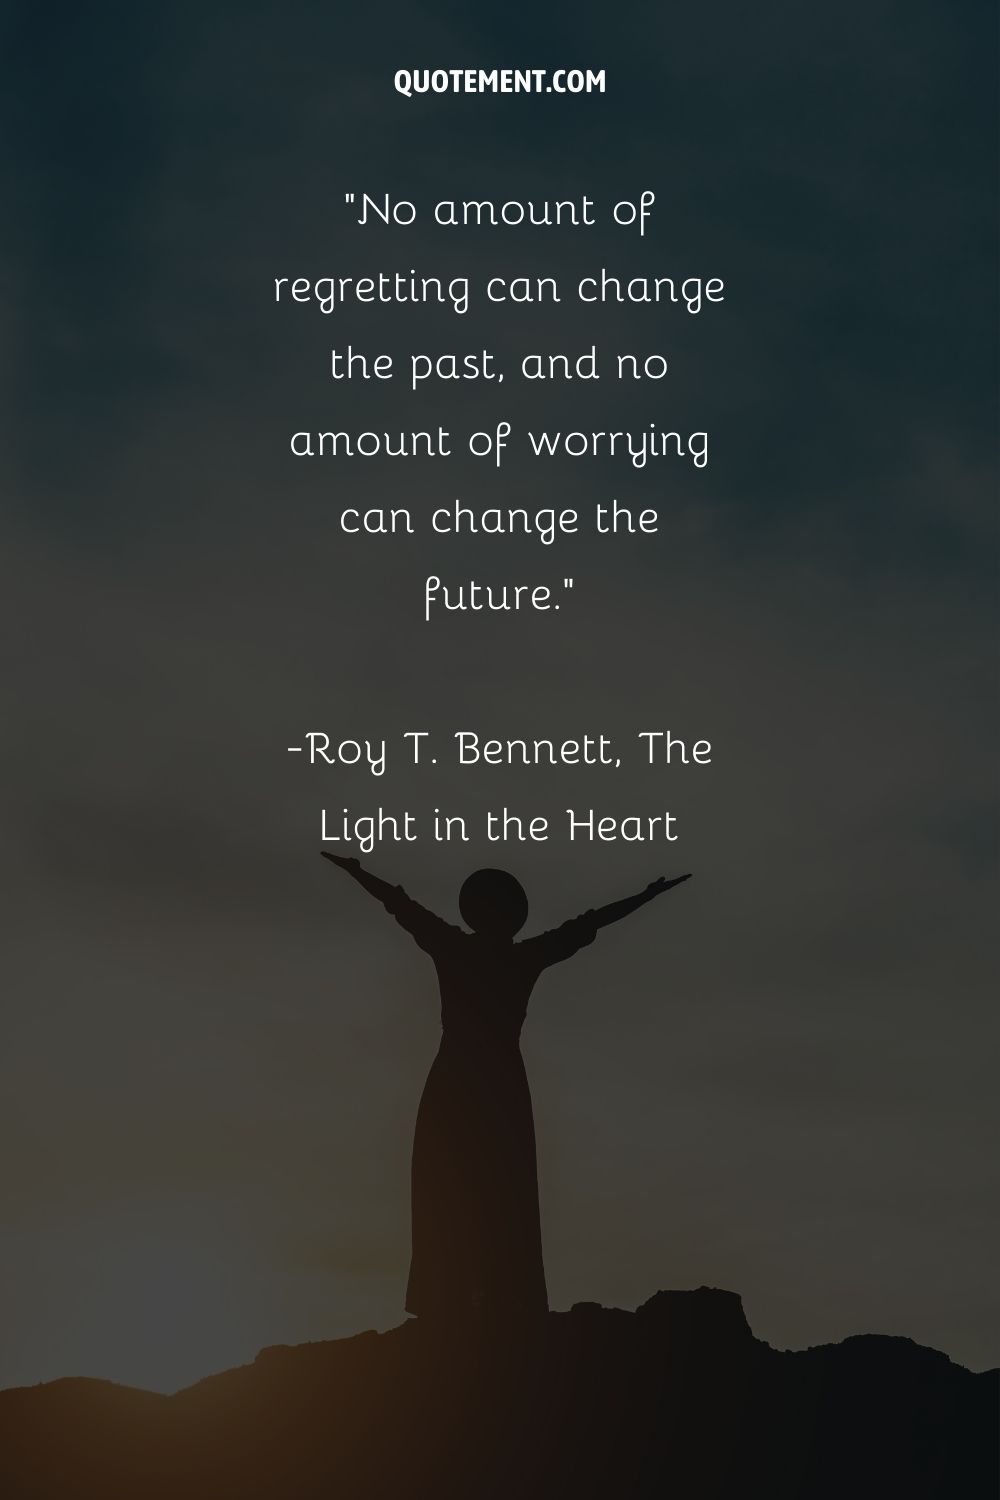 No amount of regretting can change the past, and no amount of worrying can change the future